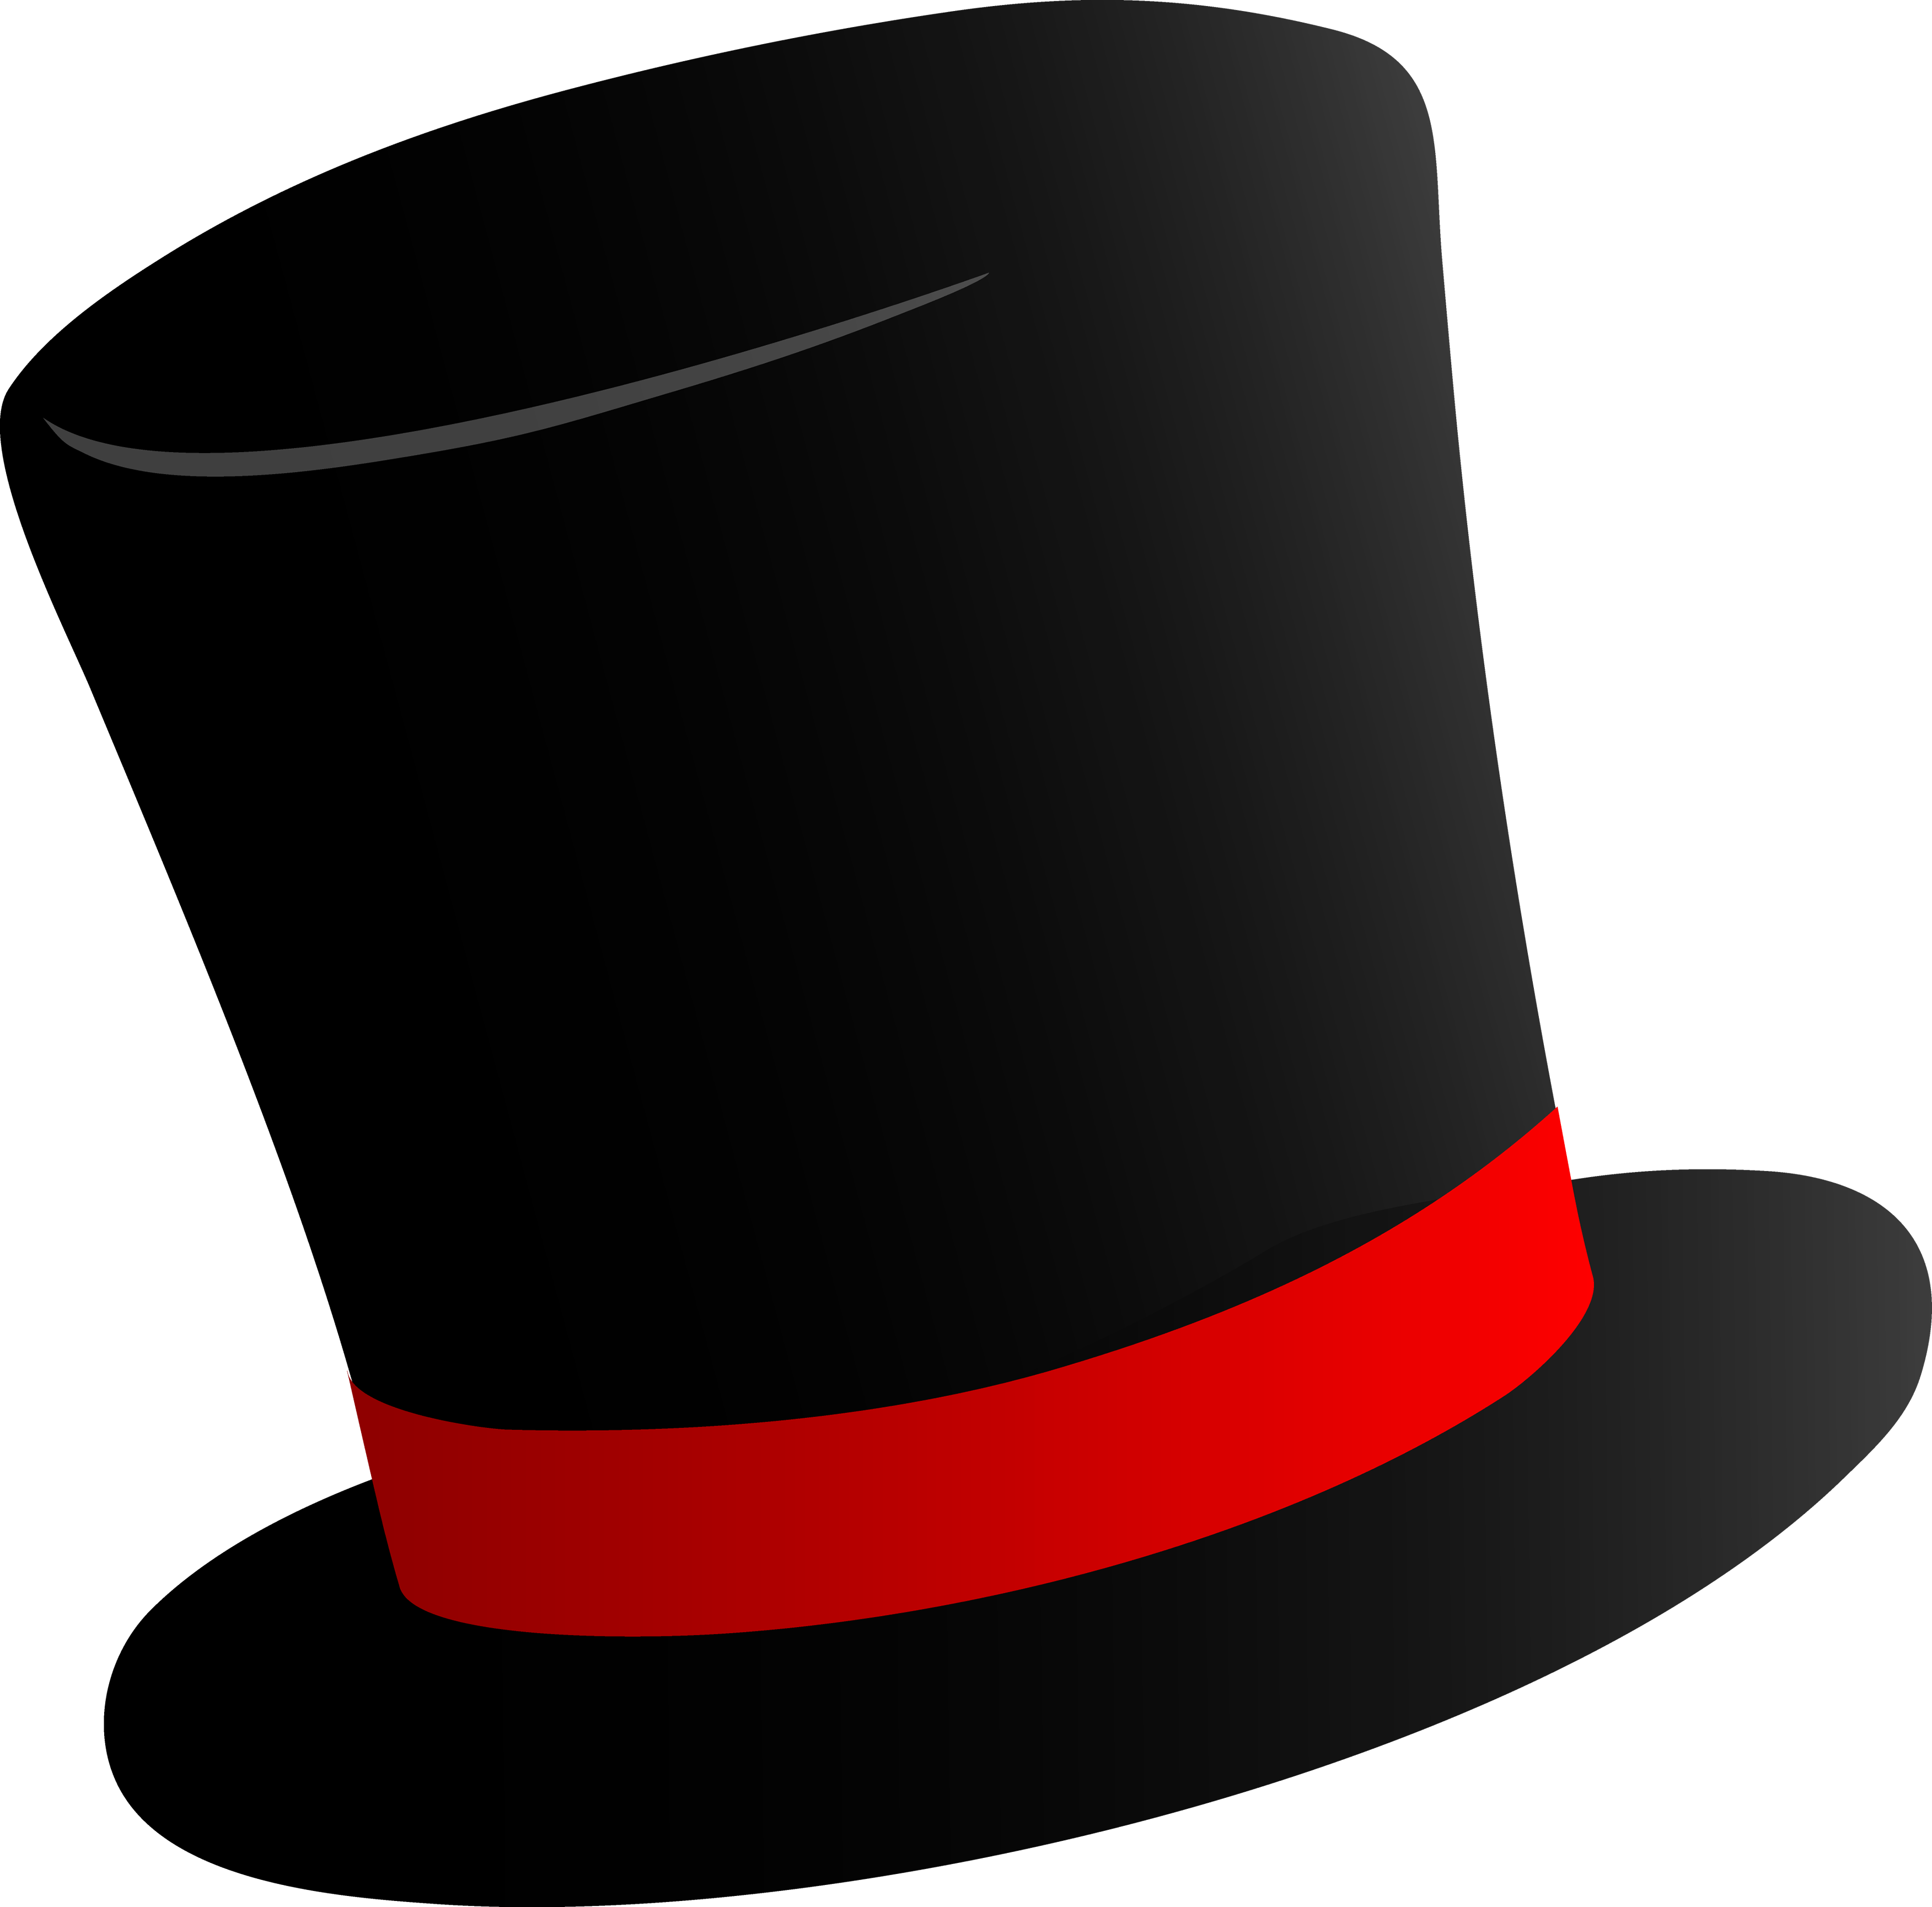 Hat Top Black PNG Image High Quality PNG Image